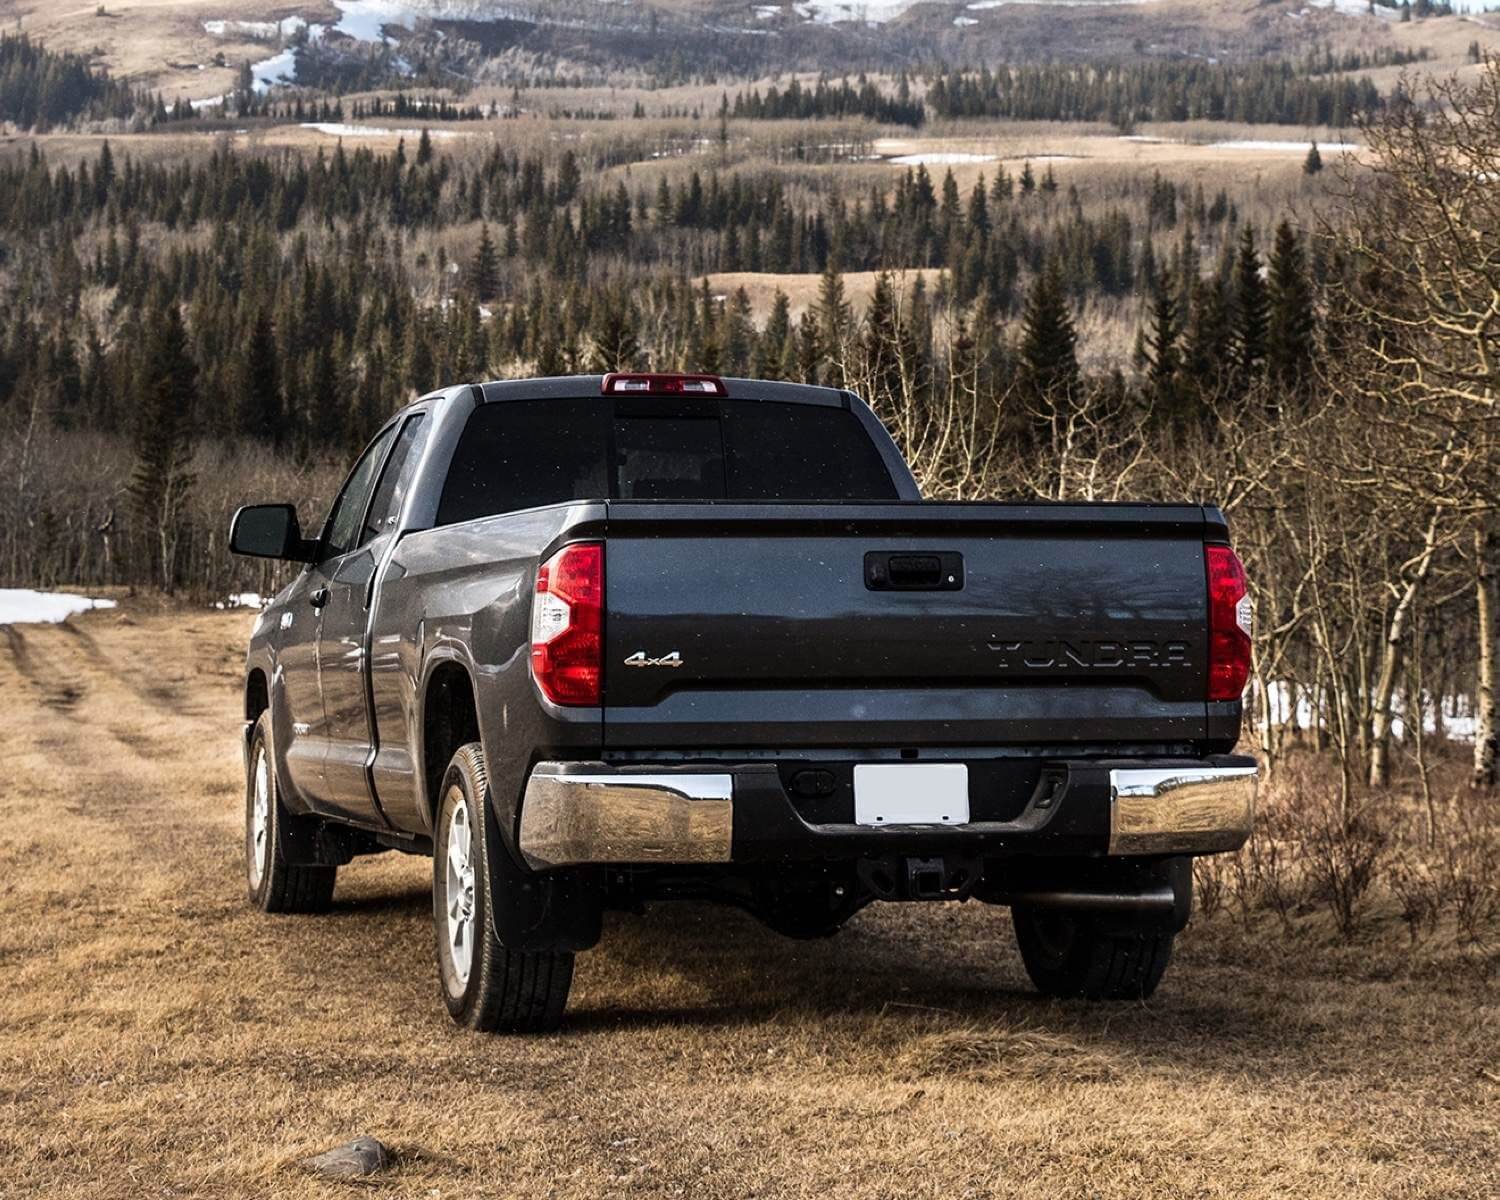 Black Toyota Tundra in the mountains